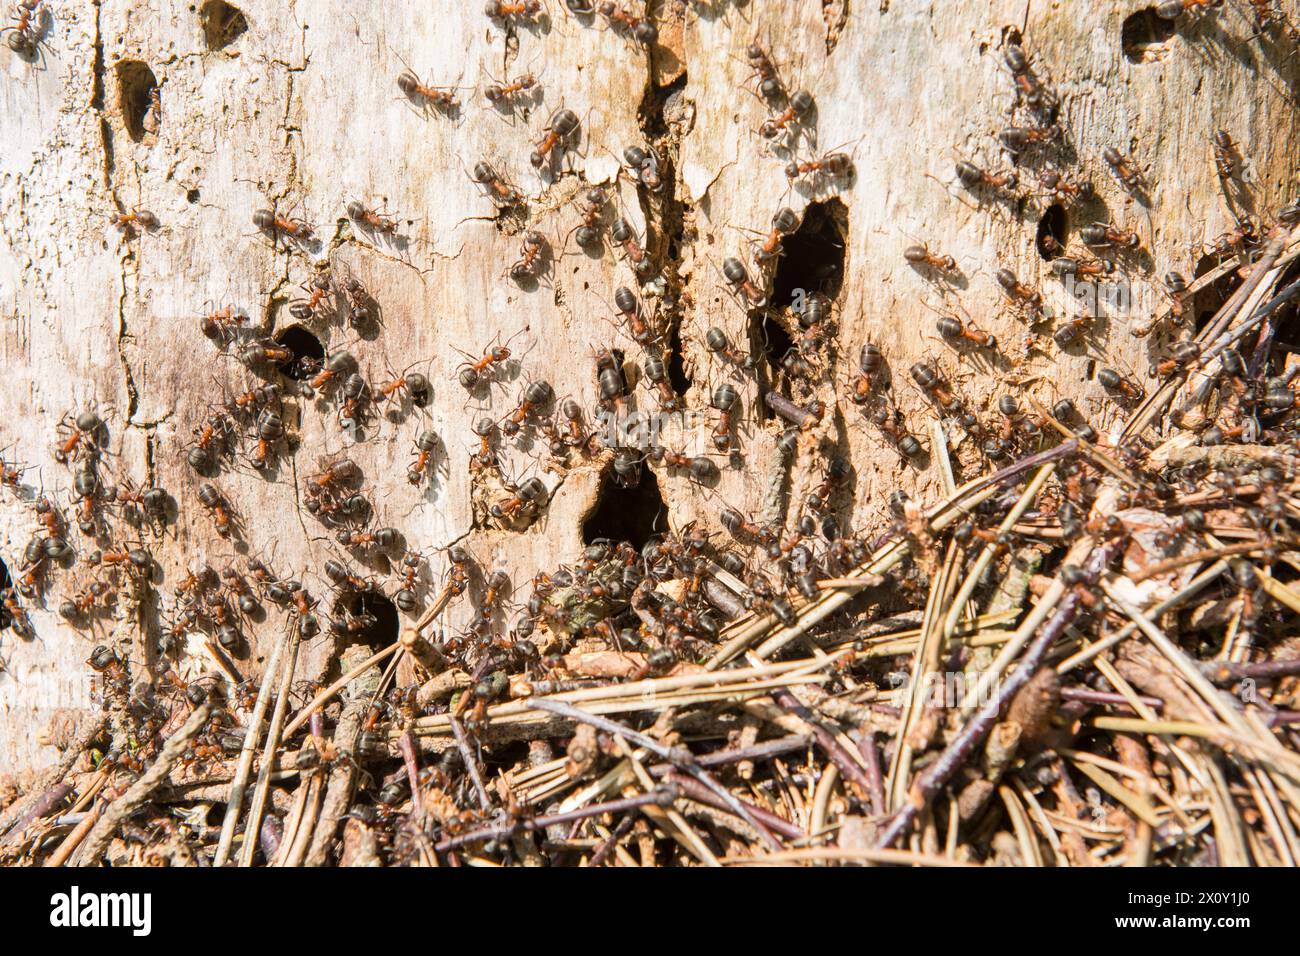 This vivid stock image provides a close-up look at red wood ants, Formica rufa, busily tending to their nest within the crevices of a dead tree, bathe Stock Photo